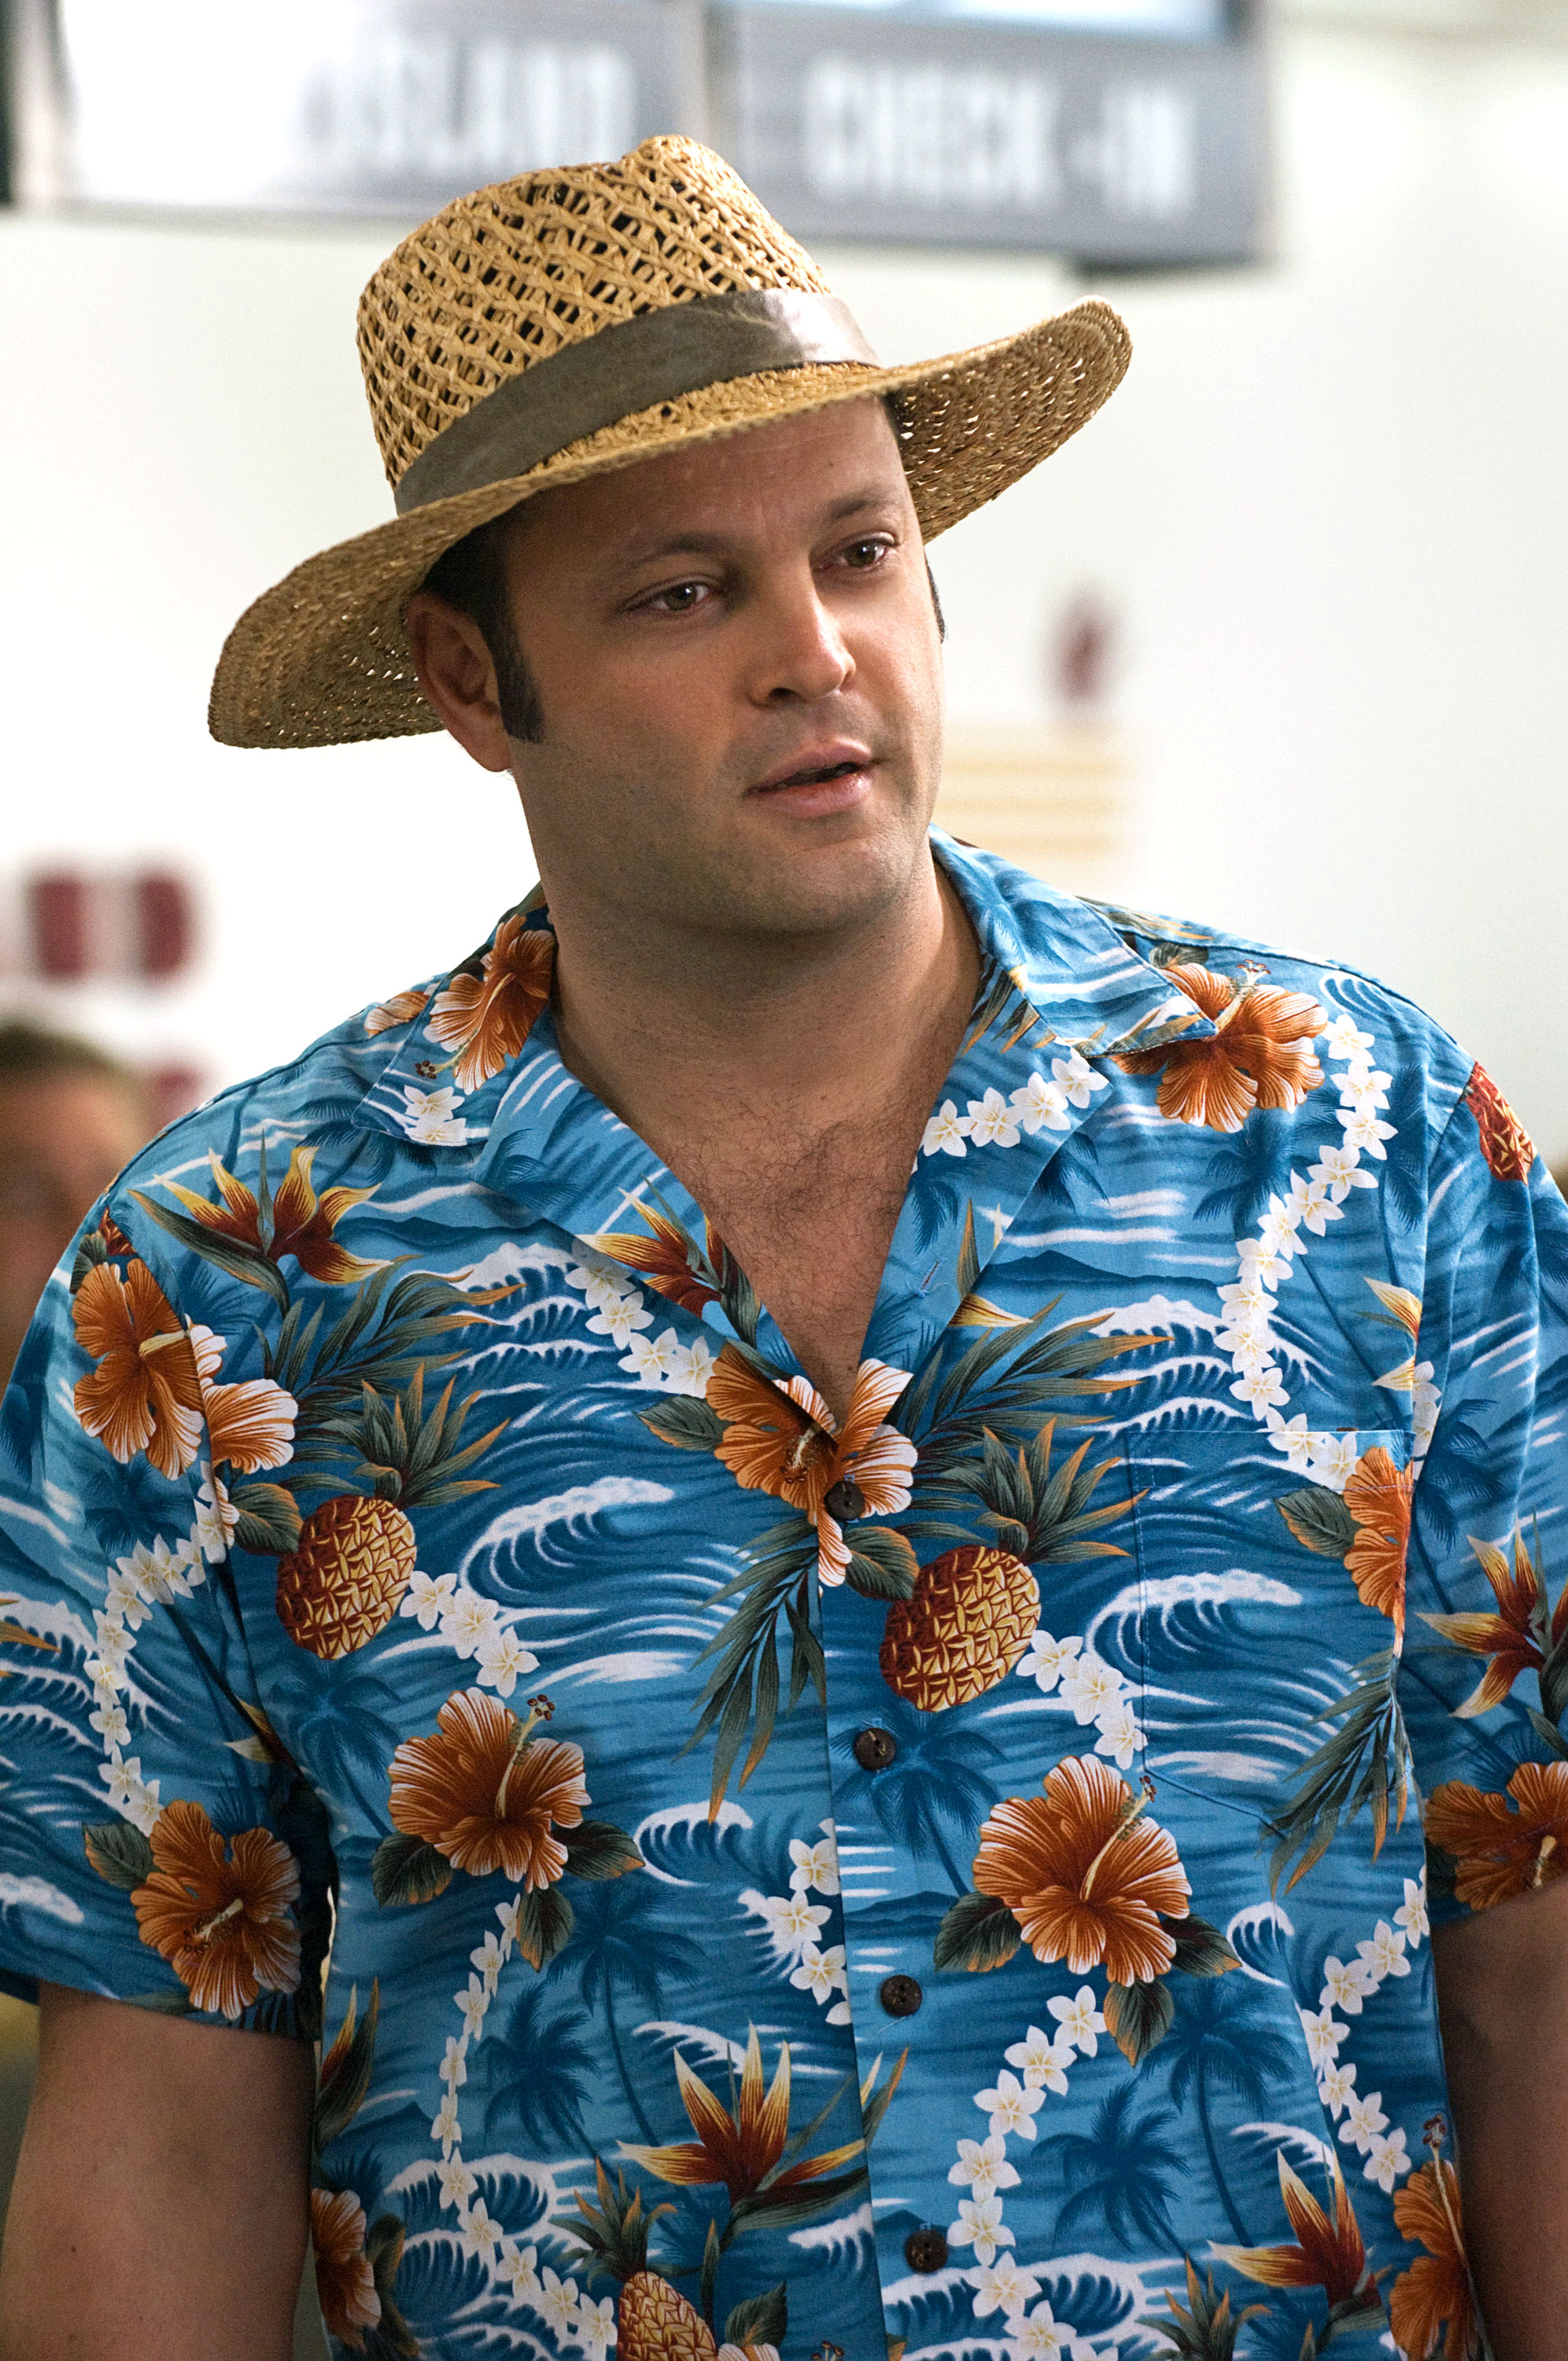 Vince in a straw hat and Hawaiian shirt